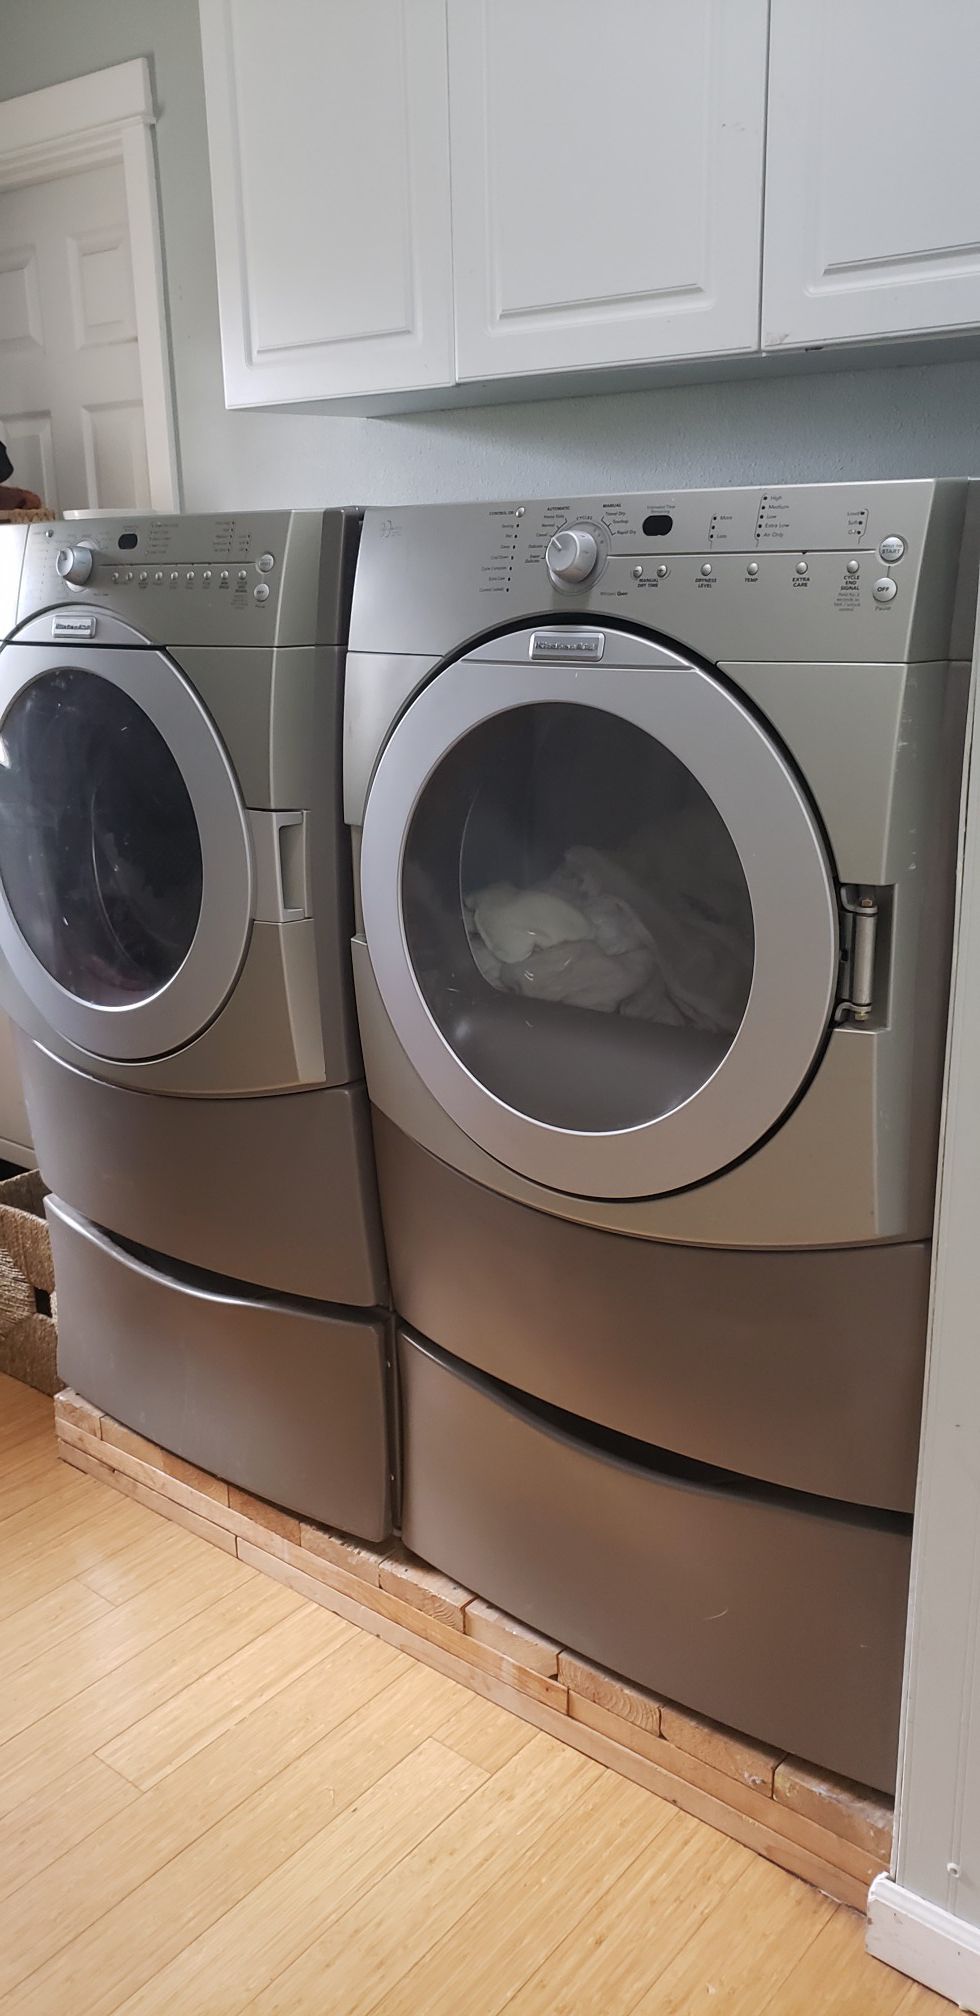 PENDING PICK-UP Free washer and dryer with pedestals